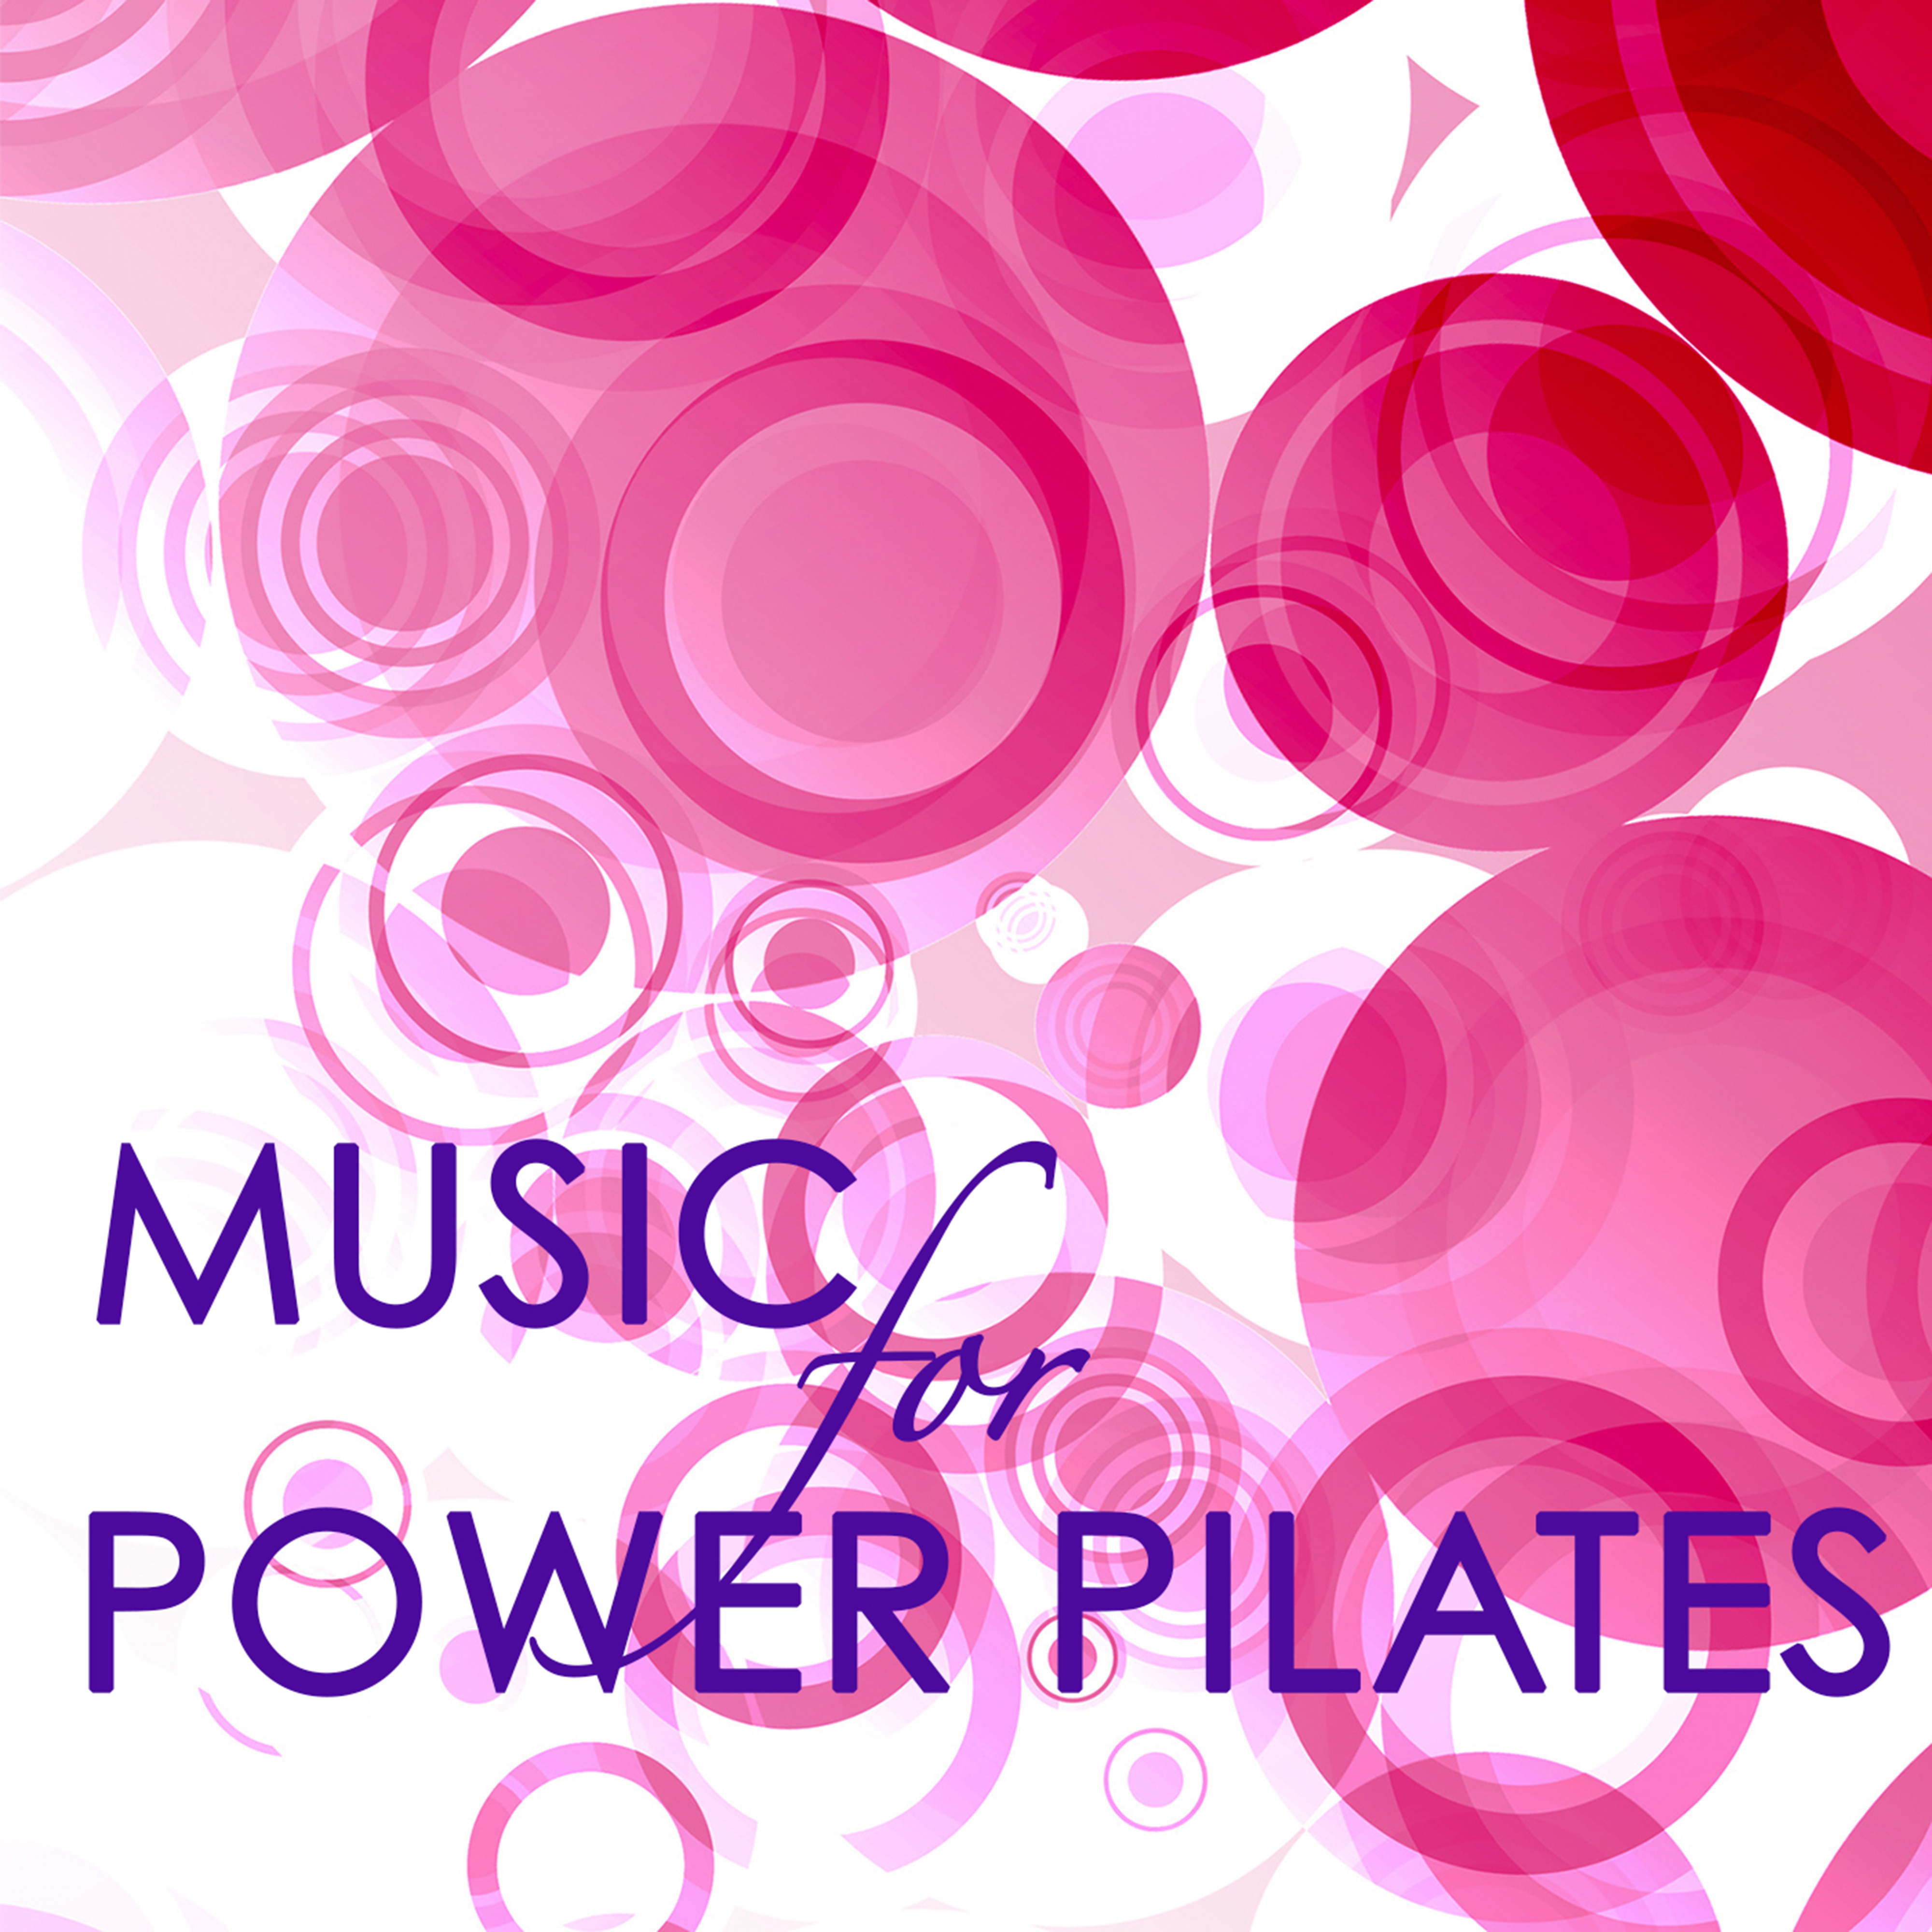 Music for Power Pilates 2014 - Bollywood Lounge & Chillout for Soft Fitness